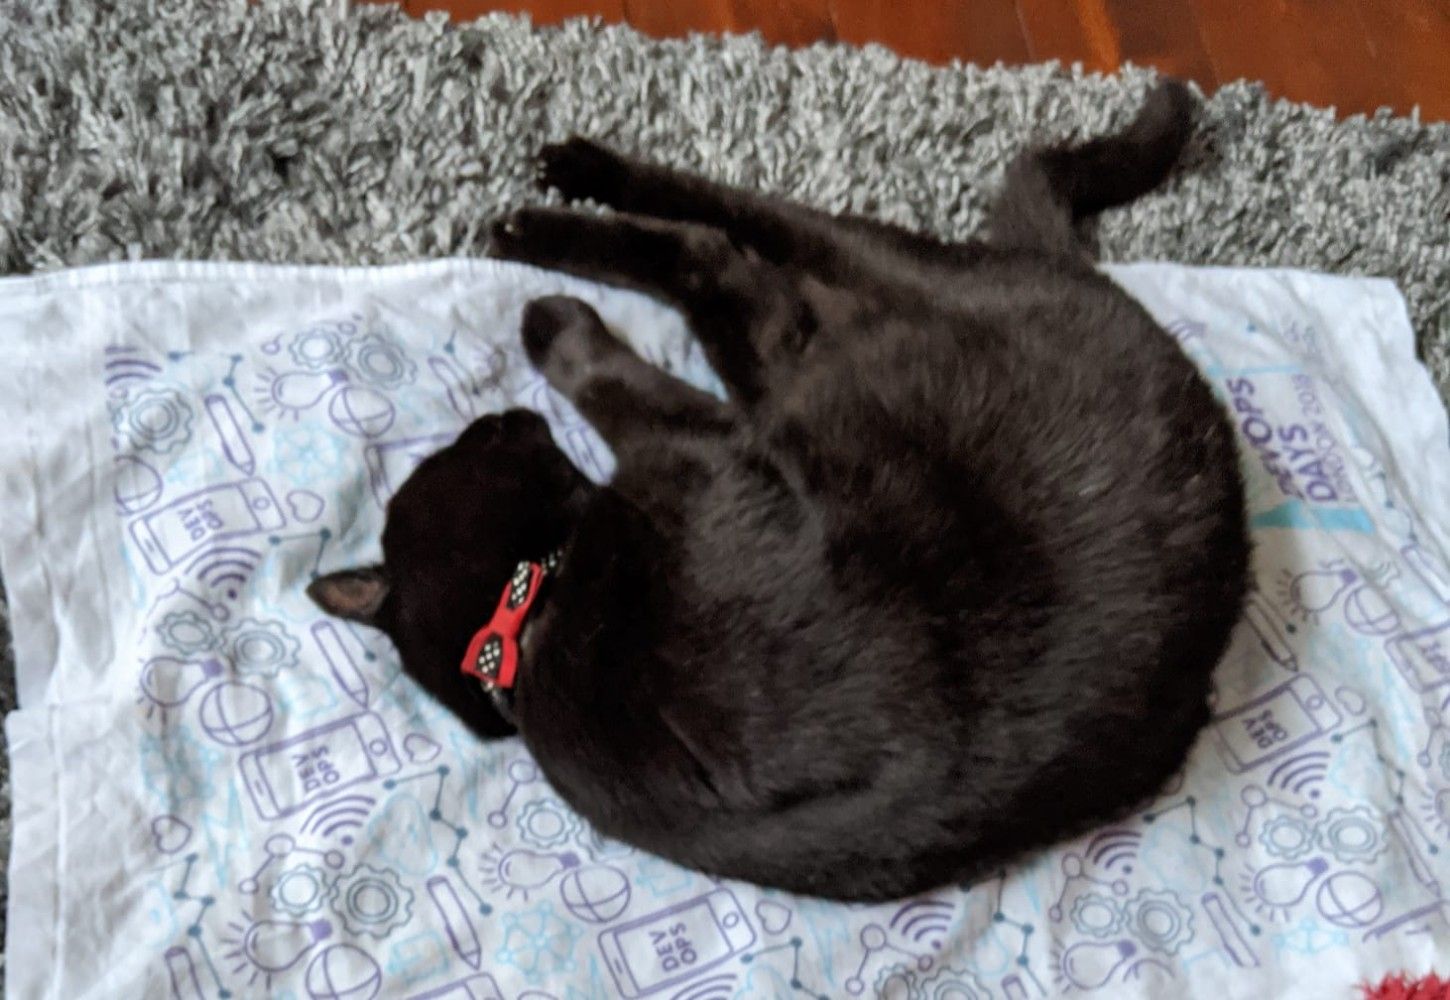 Black cat lying on top of a damn DevOpsDays London tea towel, flopped out and enjoying some level of cool